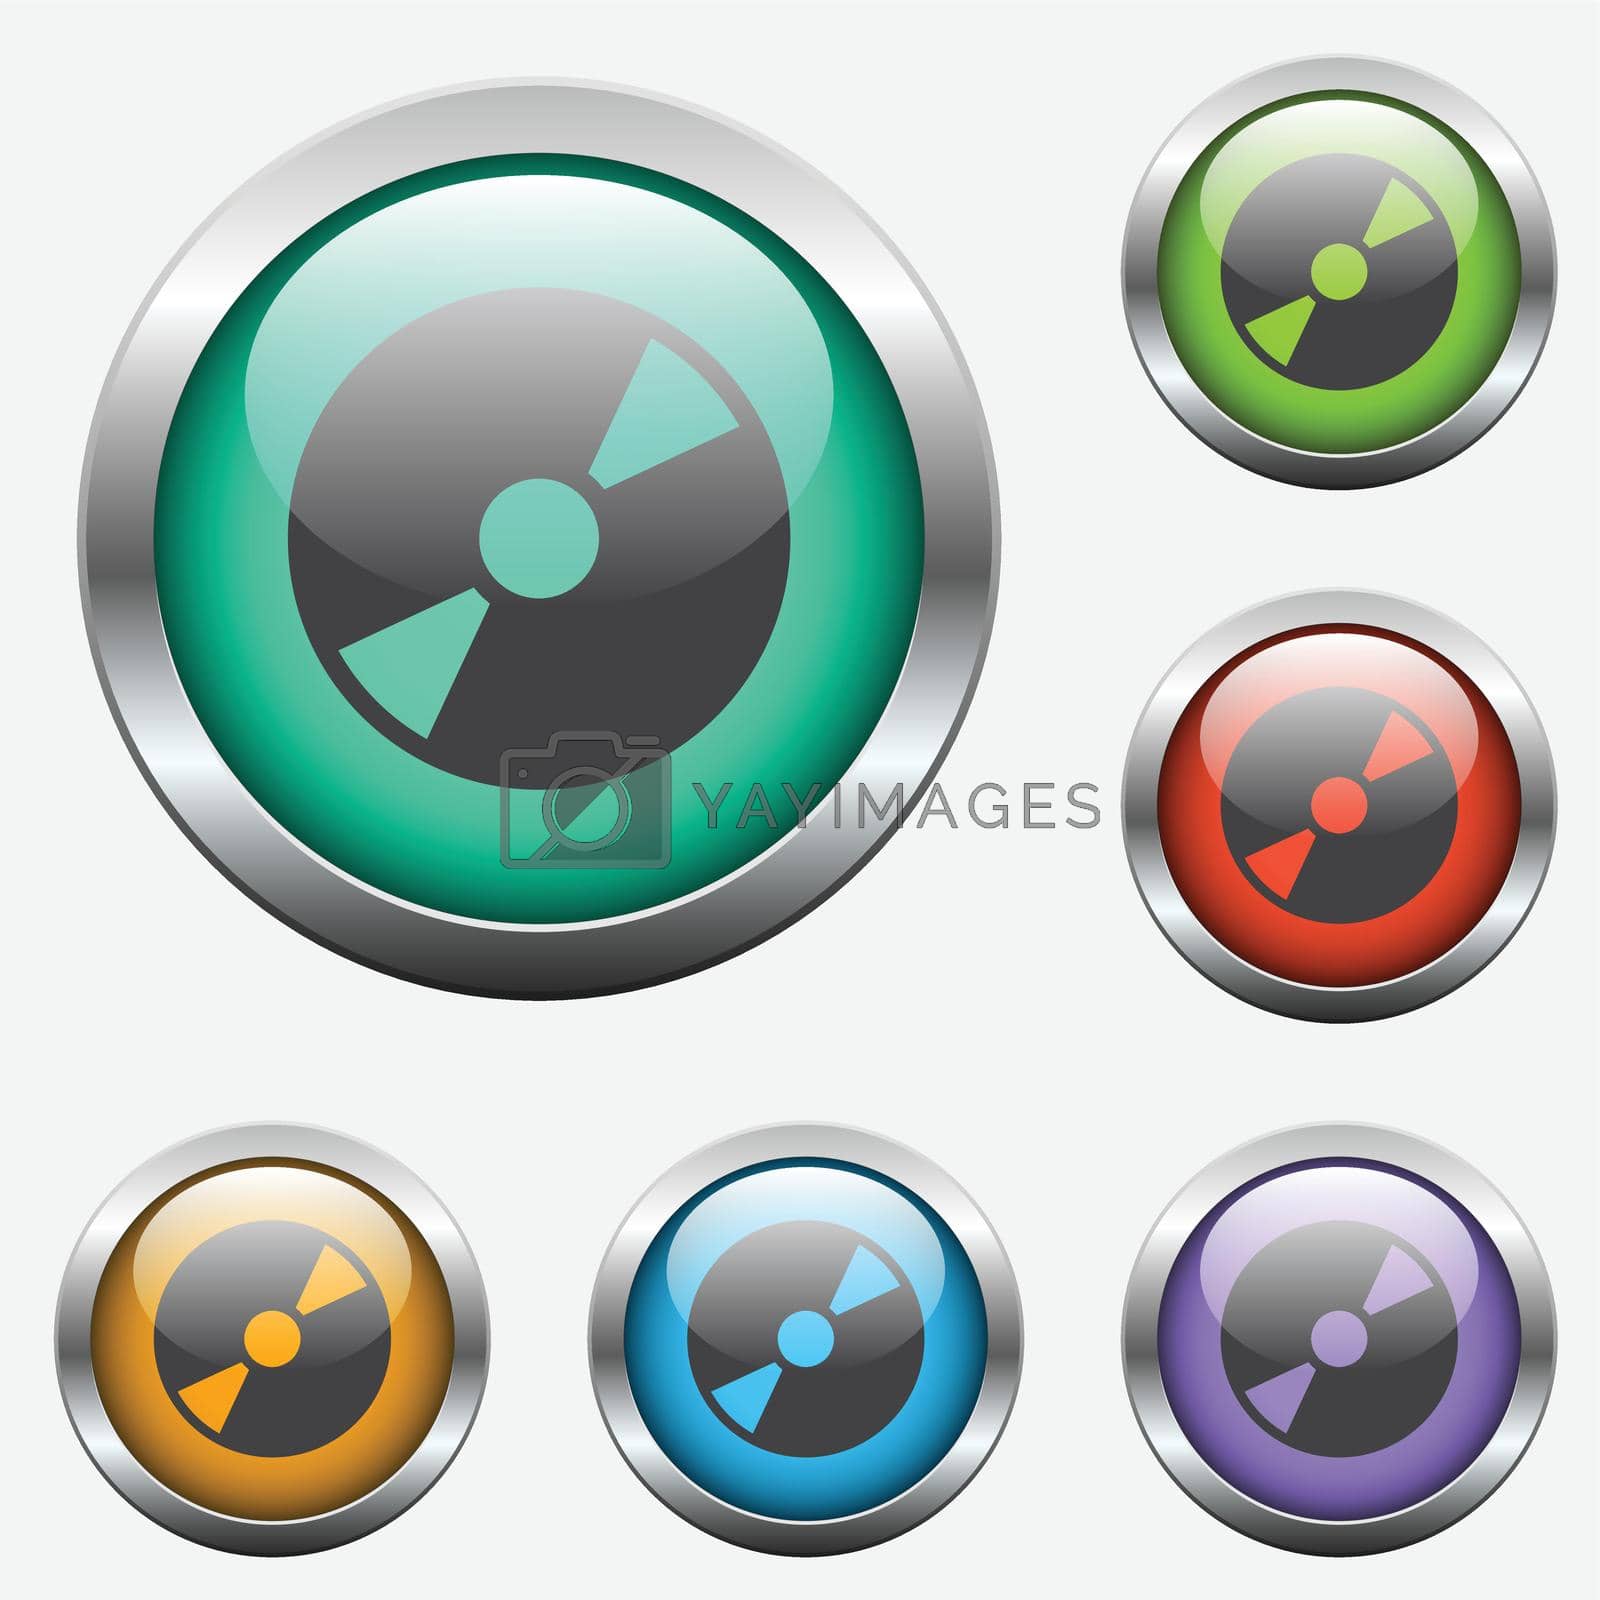 Royalty free image of cd disk glass buttons by govindamadhava108